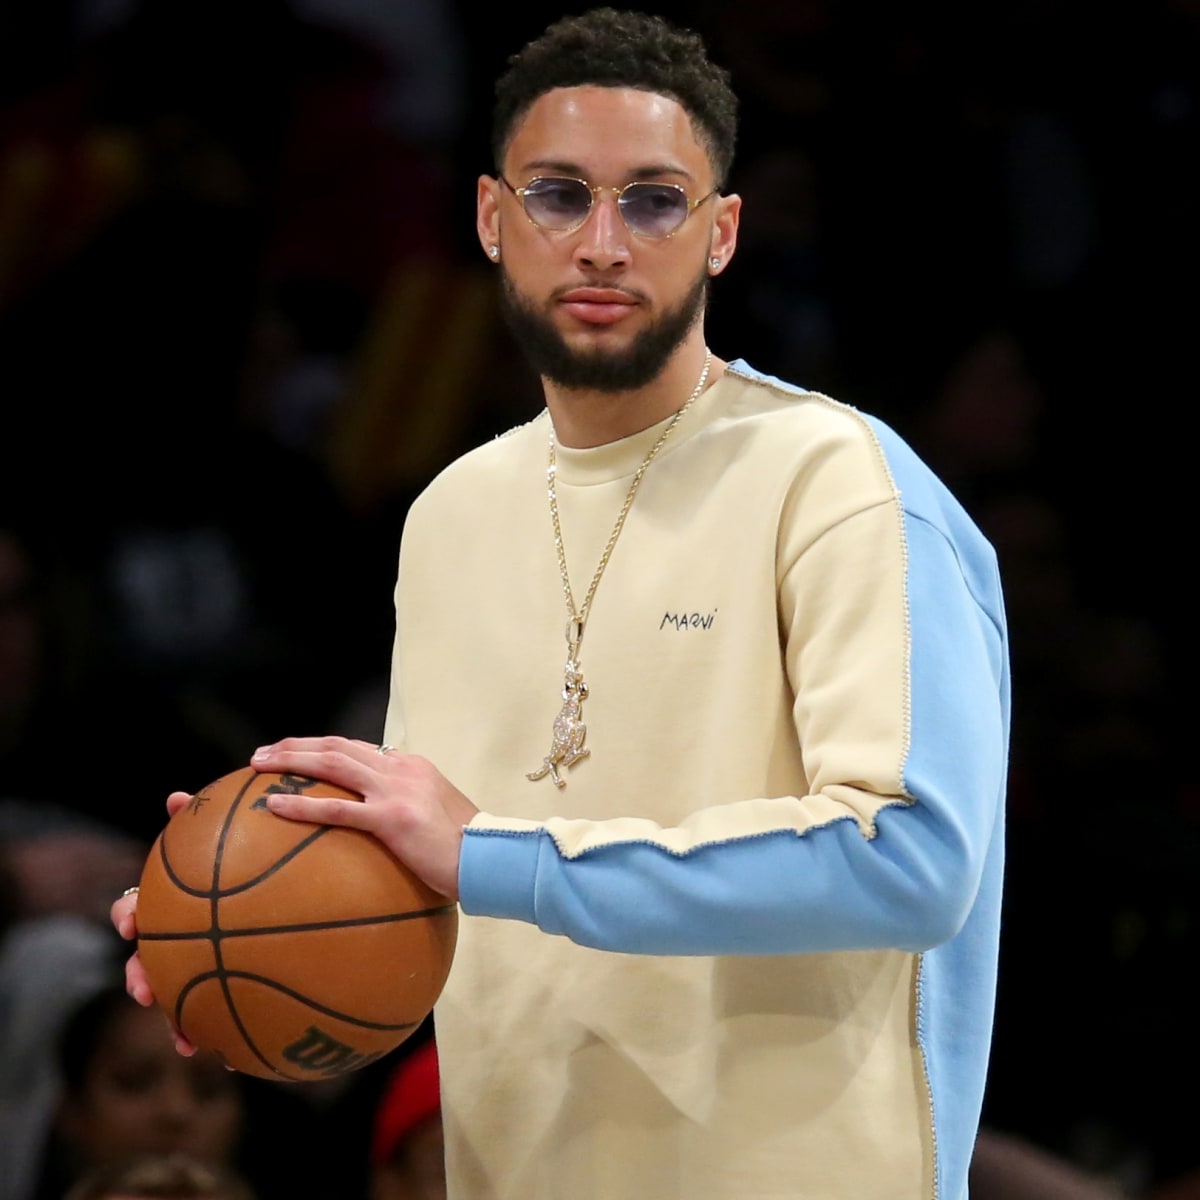 Ben Simmons' Outfit Goes Viral Courtside With So Many Clashing